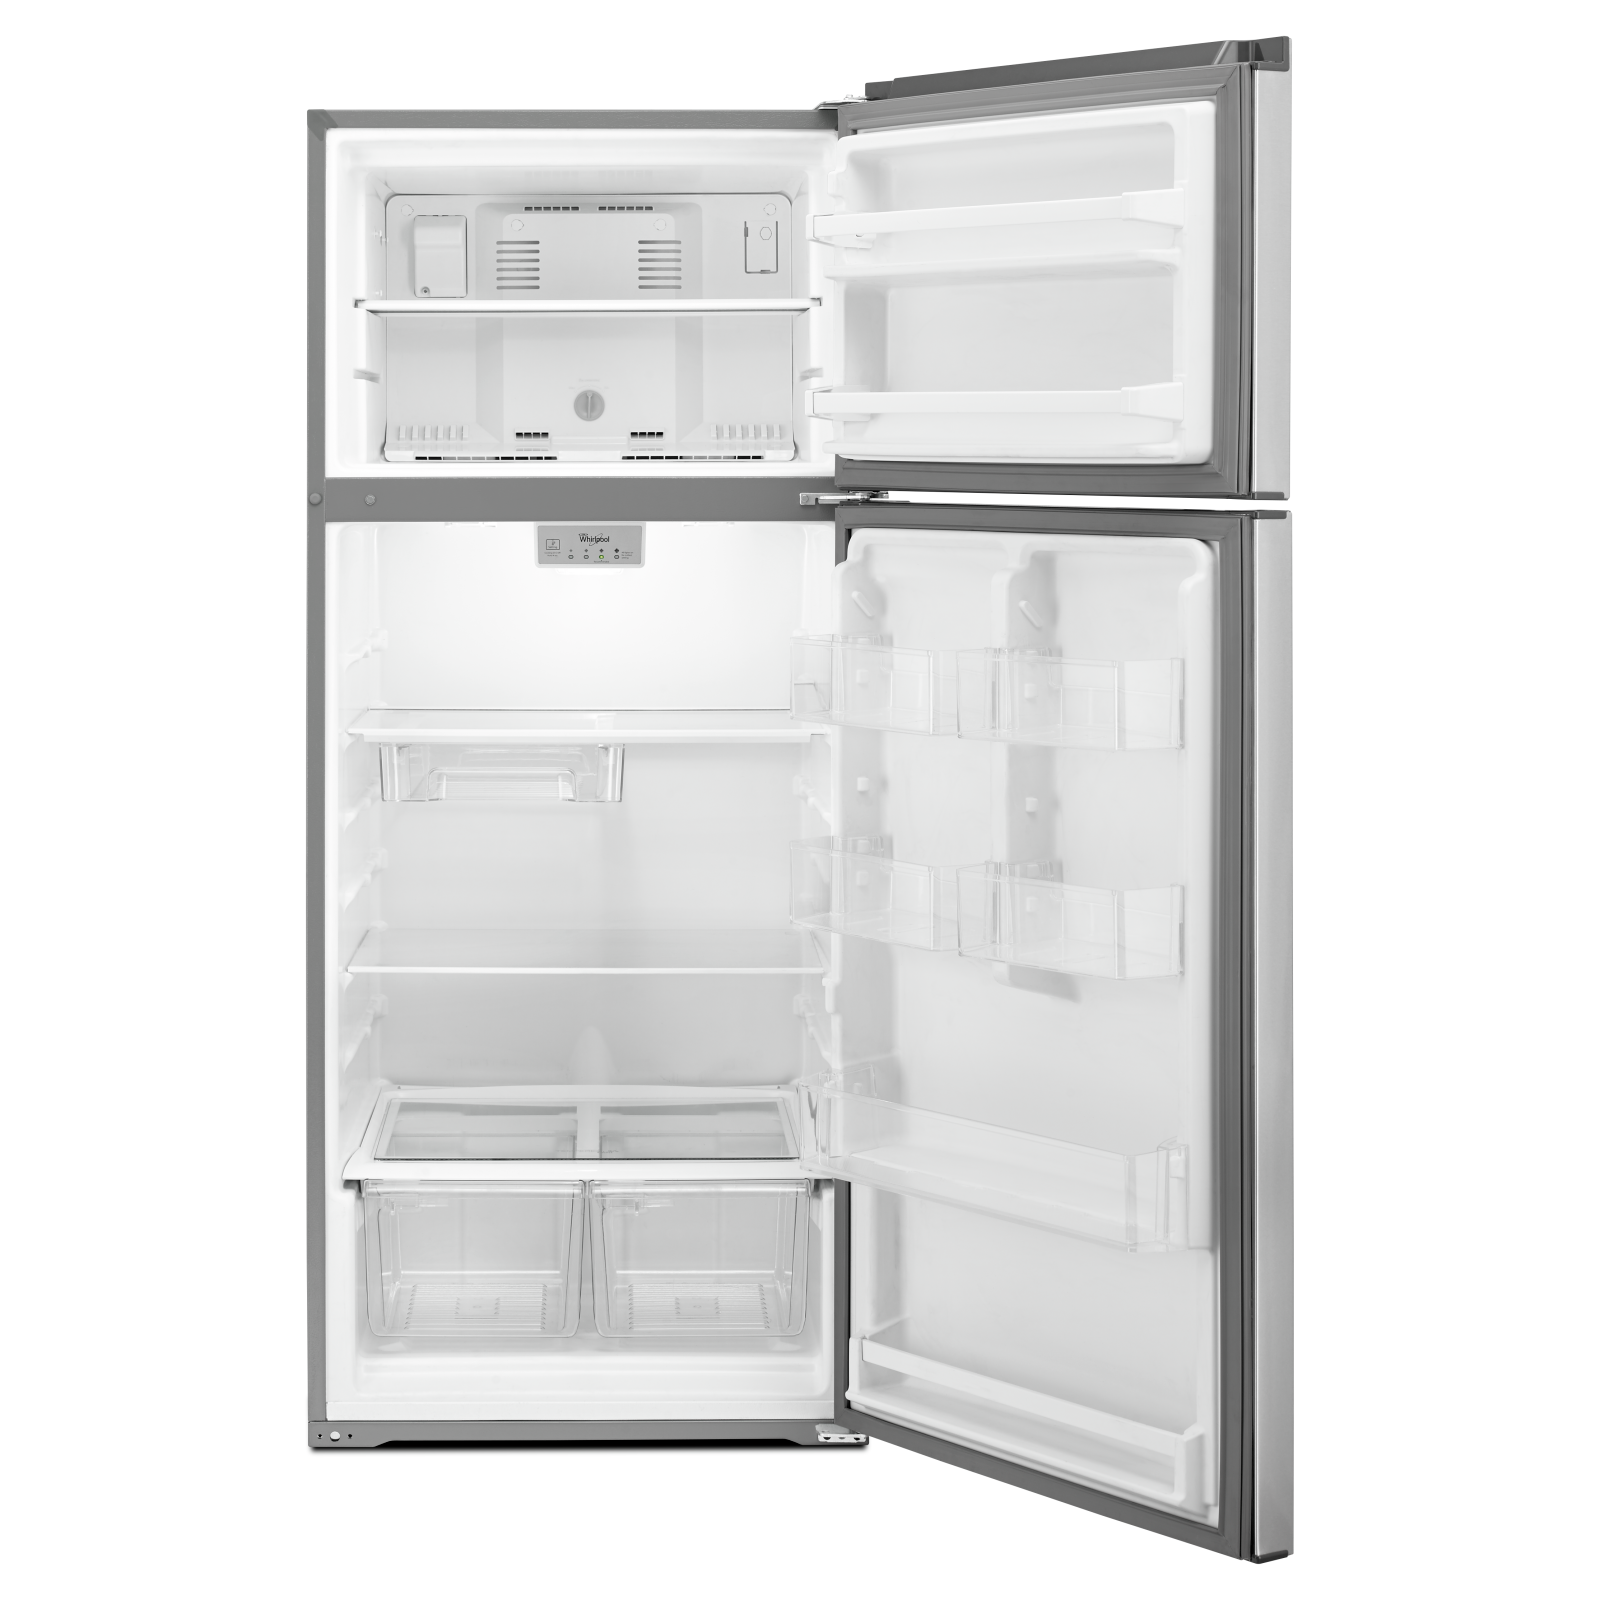 Whirlpool - 28 Inch 17.64 cu. ft Top Mount Refrigerator in Stainless - WRT518SZFG